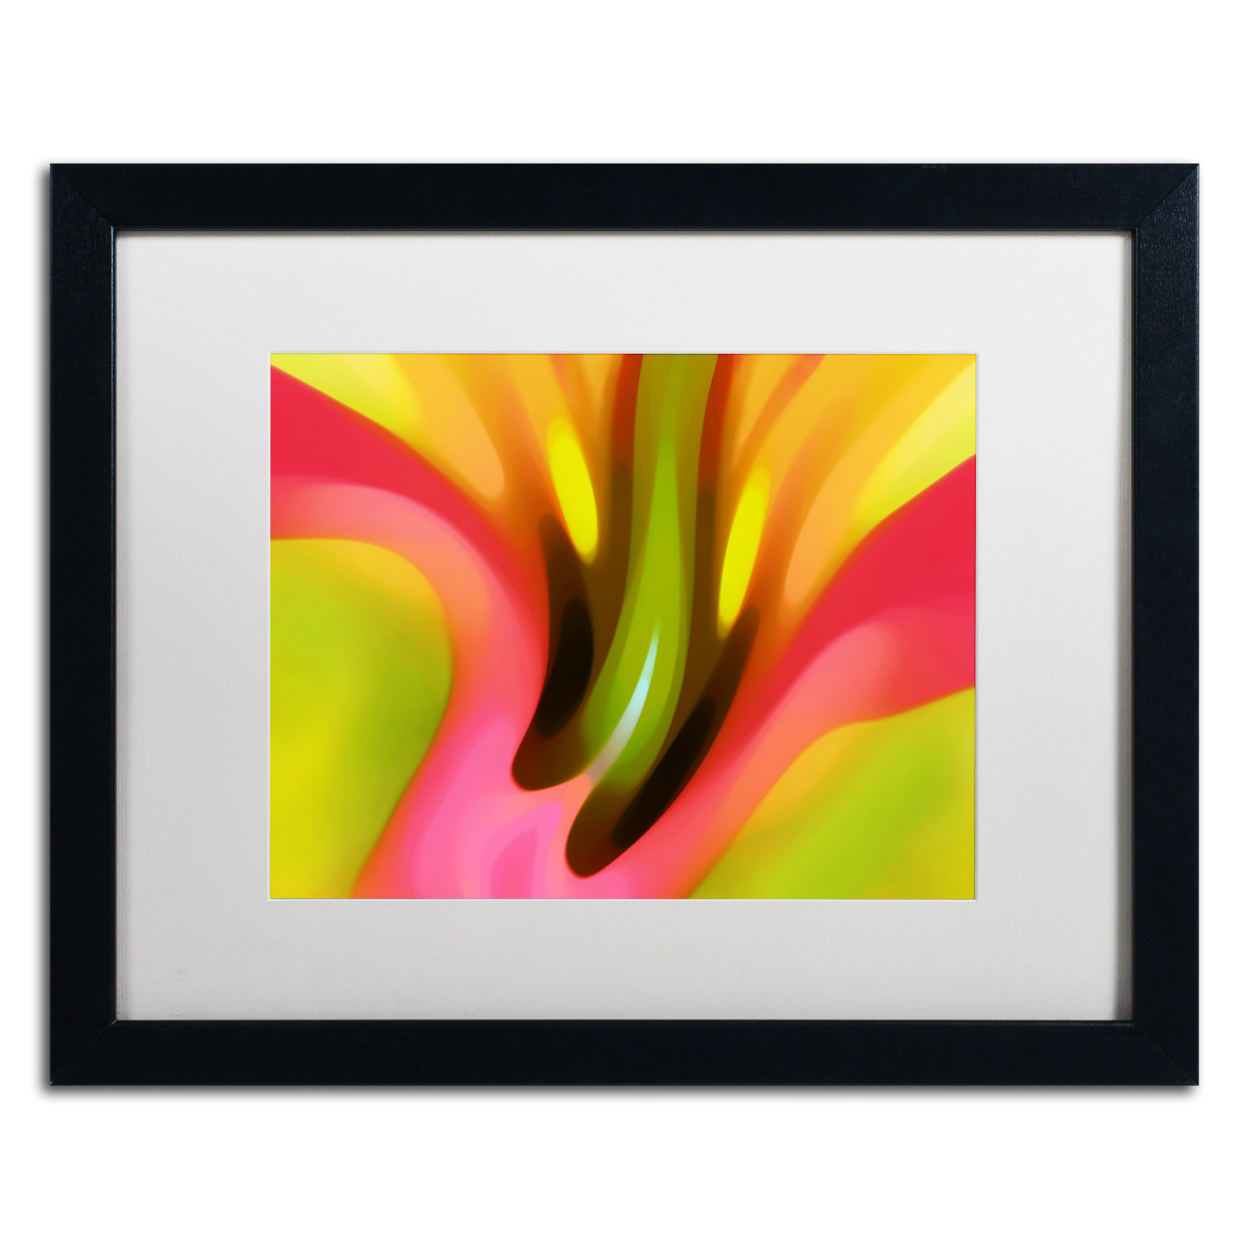 Amy Vangsgard 'Pink Lily' Black Wooden Framed Art 18 X 22 Inches